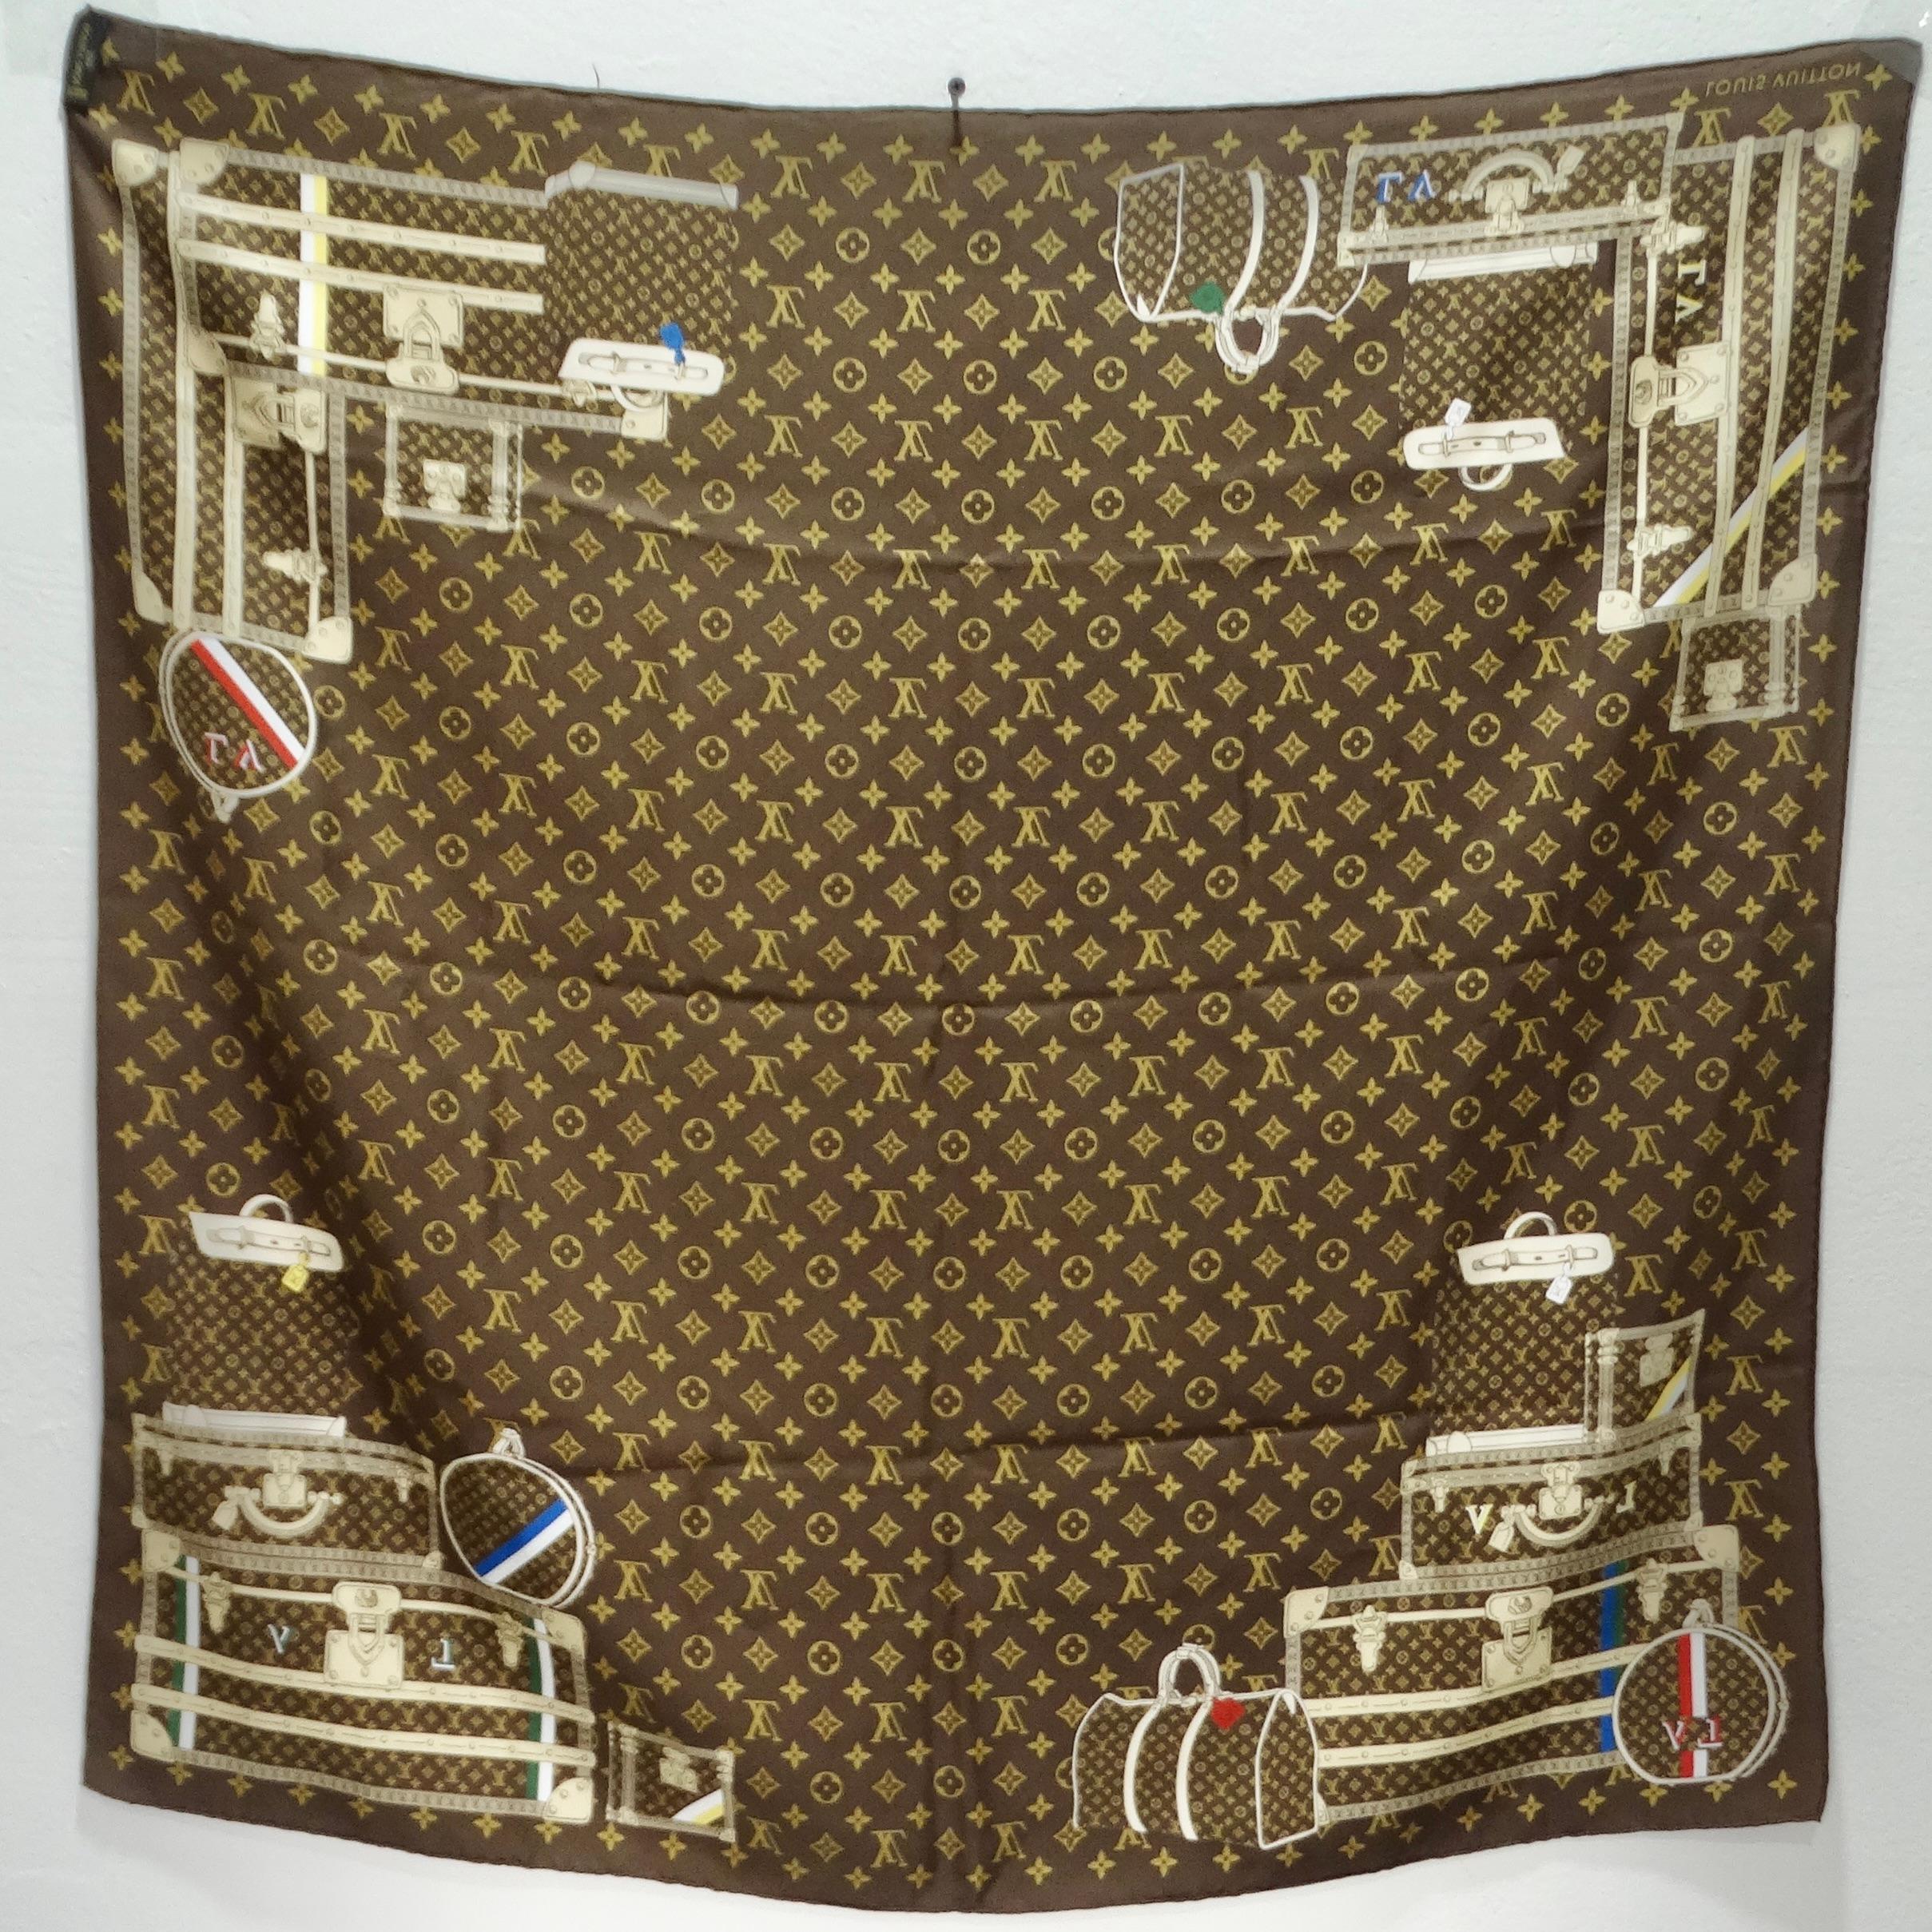 Introducing the Louis Vuitton Travel Trunks & Bags Monogram Brown Silk Scarf – a fusion of luxury and playful style that pays homage to the iconic brand's heritage. Crafted from sumptuous silk, this scarf features the signature Louis Vuitton